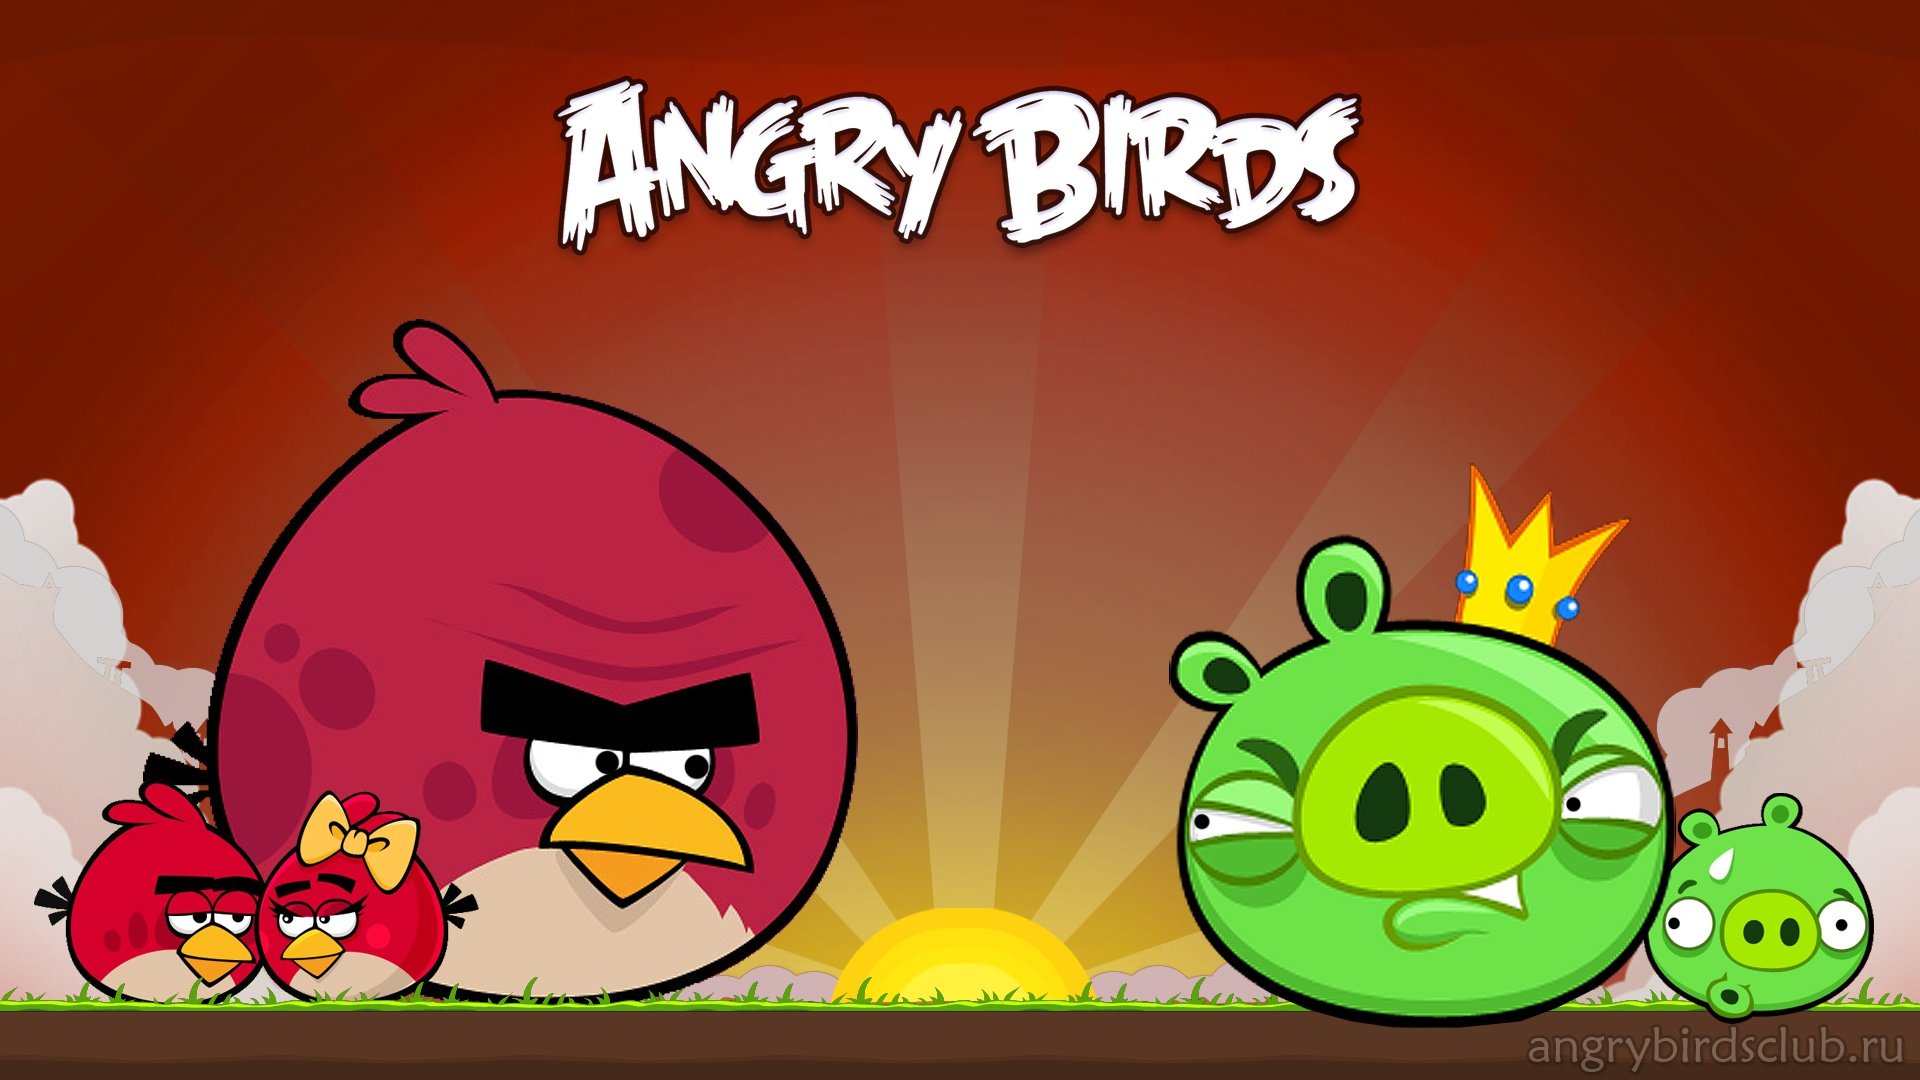 Angry Birds wallpapers 1920x1080 Full HD (1080p) desktop backgrounds